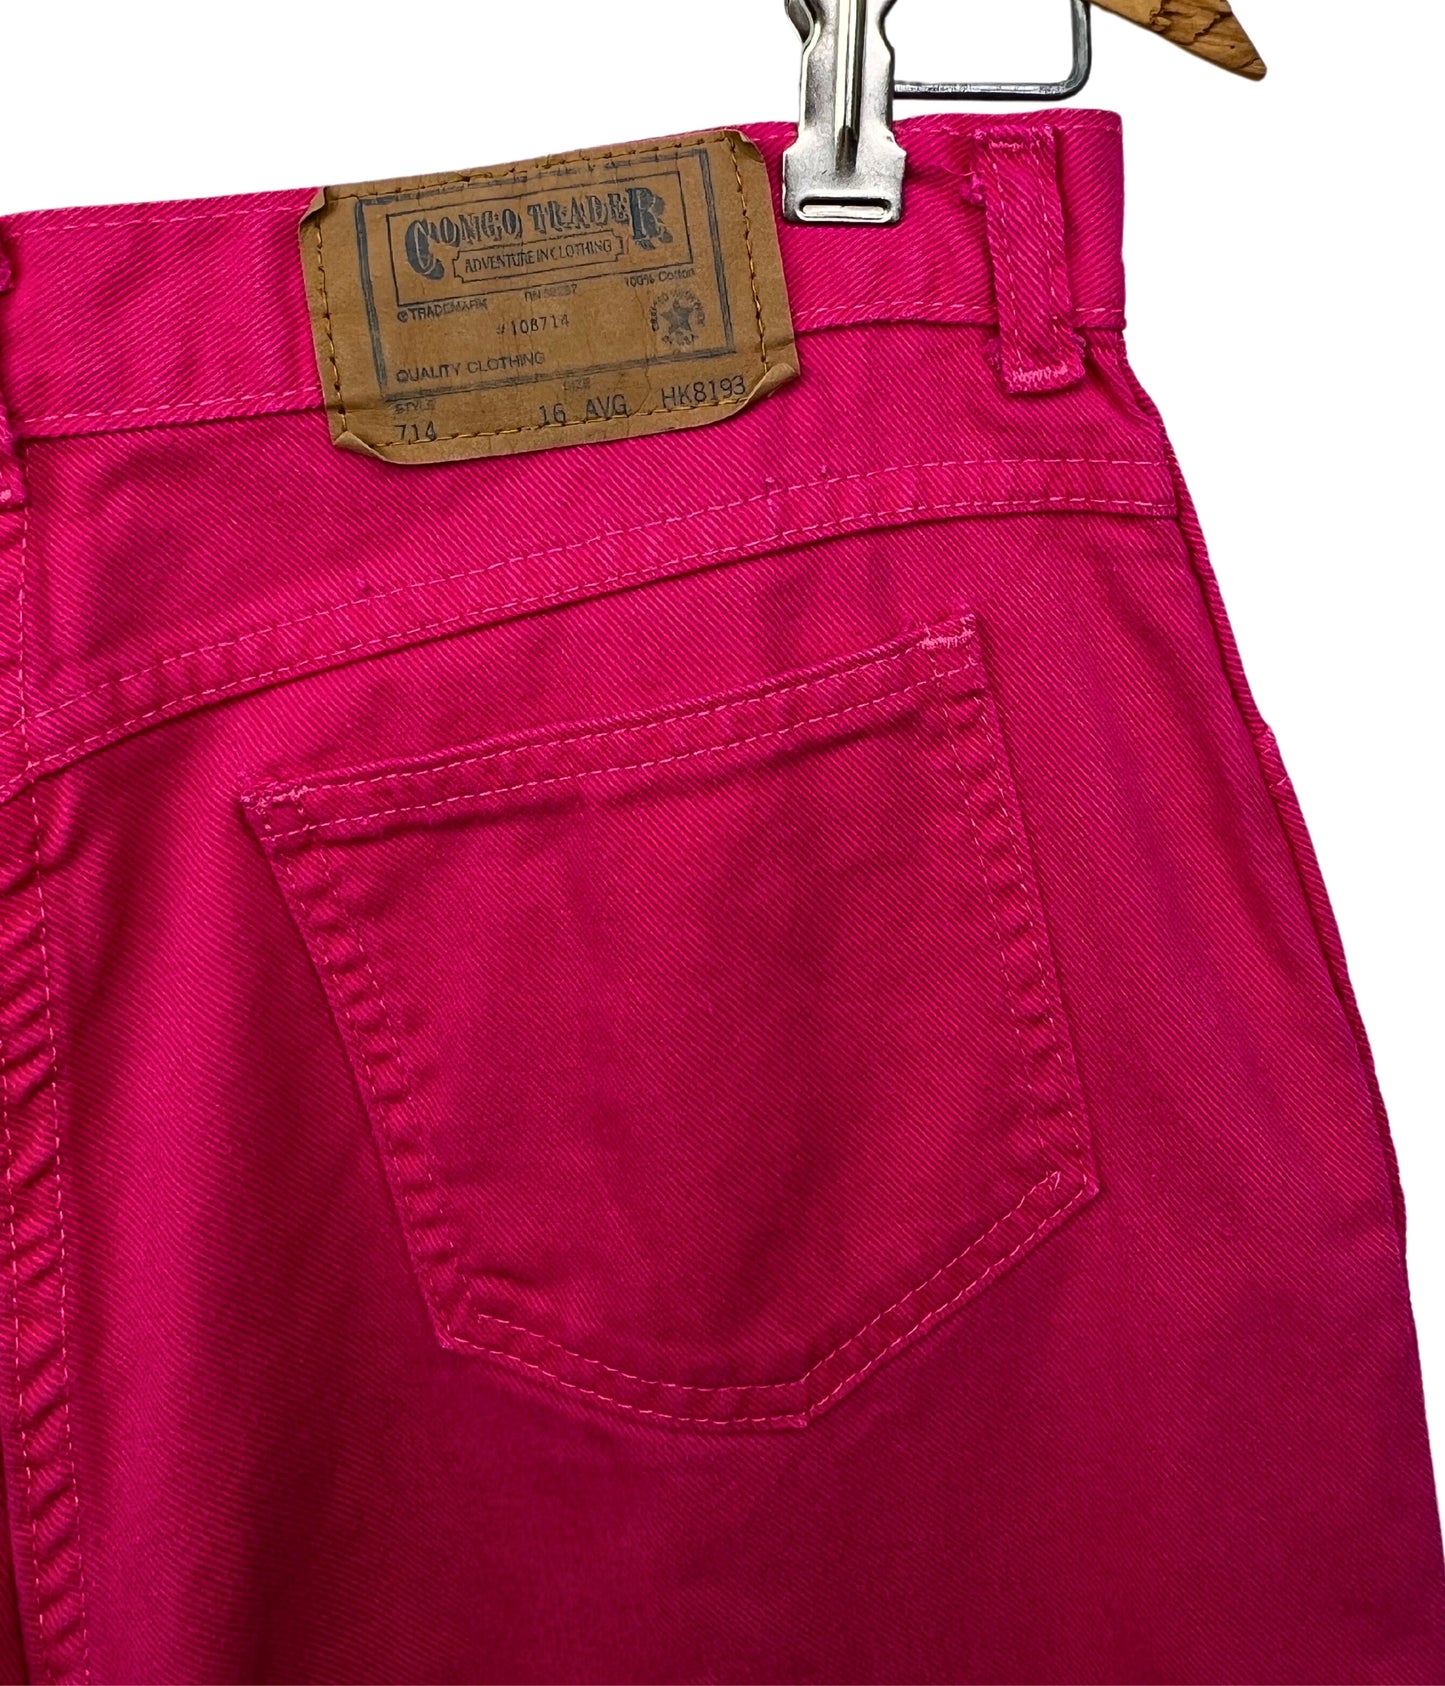 90’s Hot Pink Barbiecore 11” Jean Shorts Size 8/10